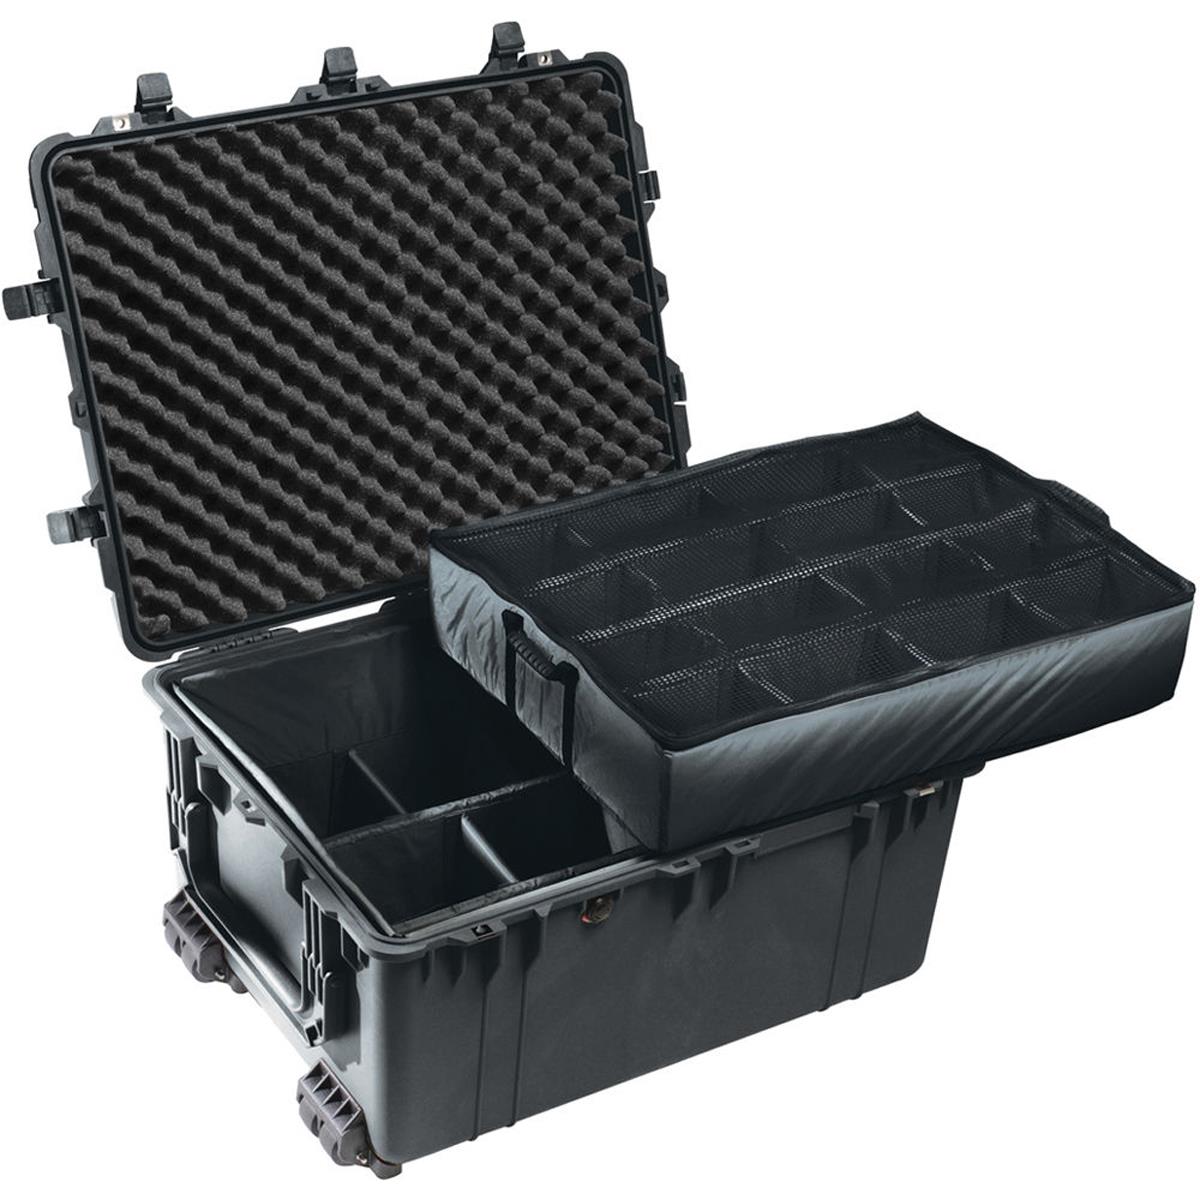 Pelican 1630 Watertight Hard Case with Padded Dividers & 4 Wheels - Black -  1630-004-110